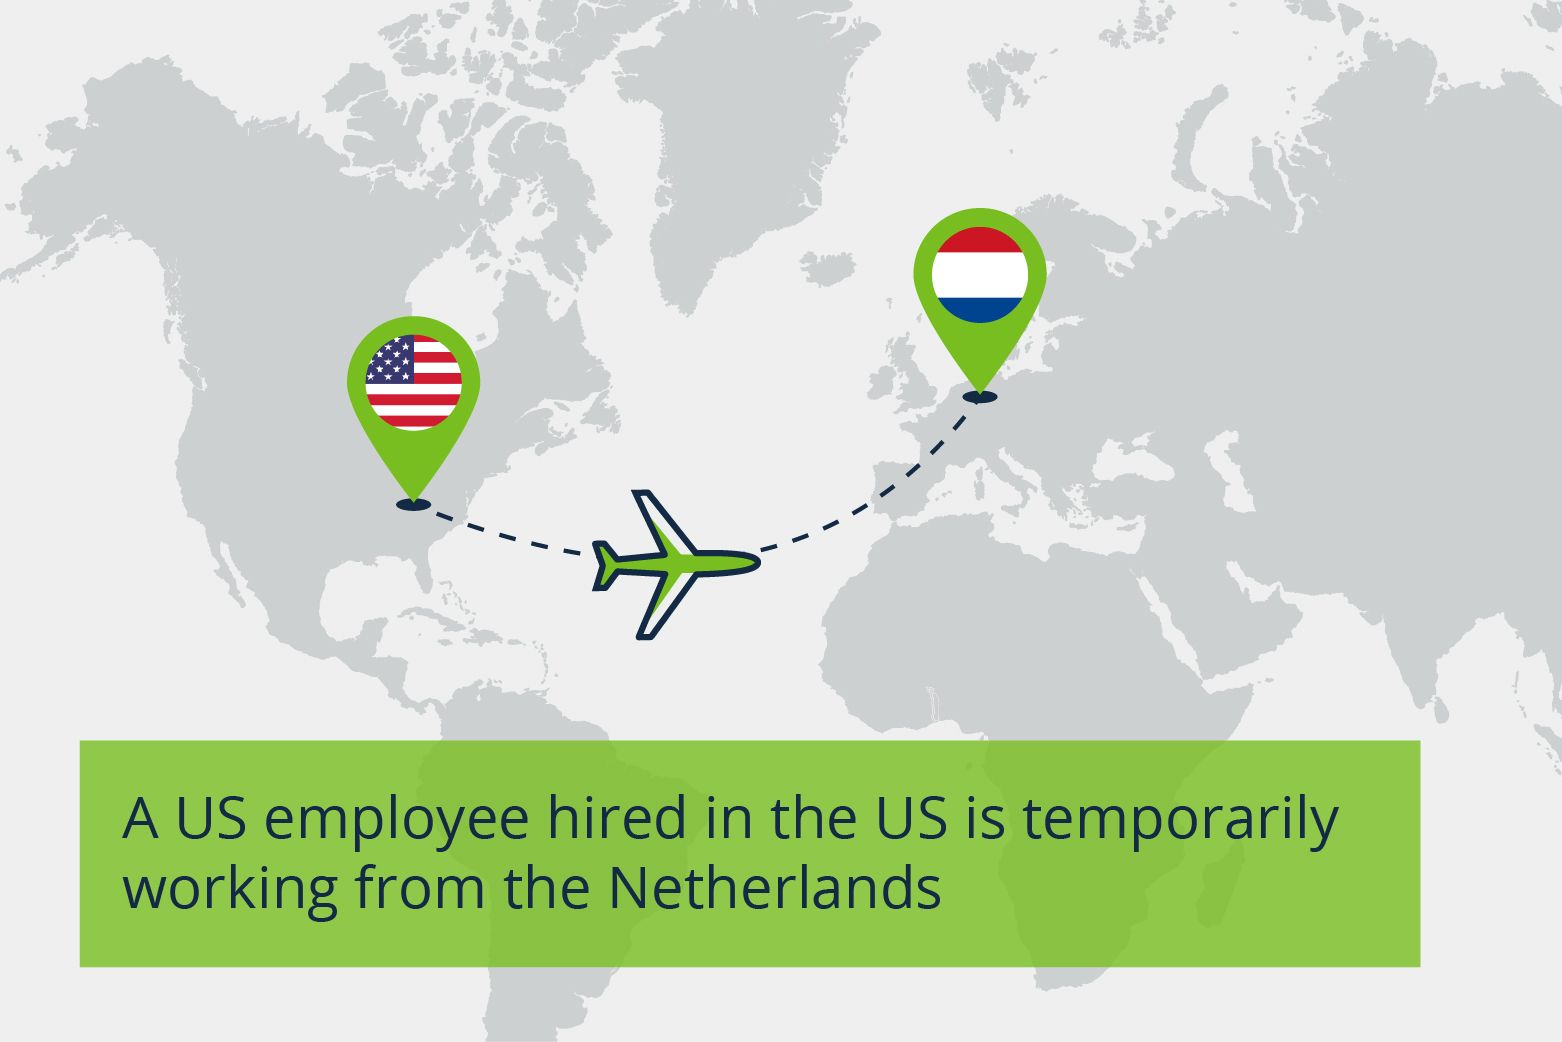 map of us employee working in netherlands with plane and flags